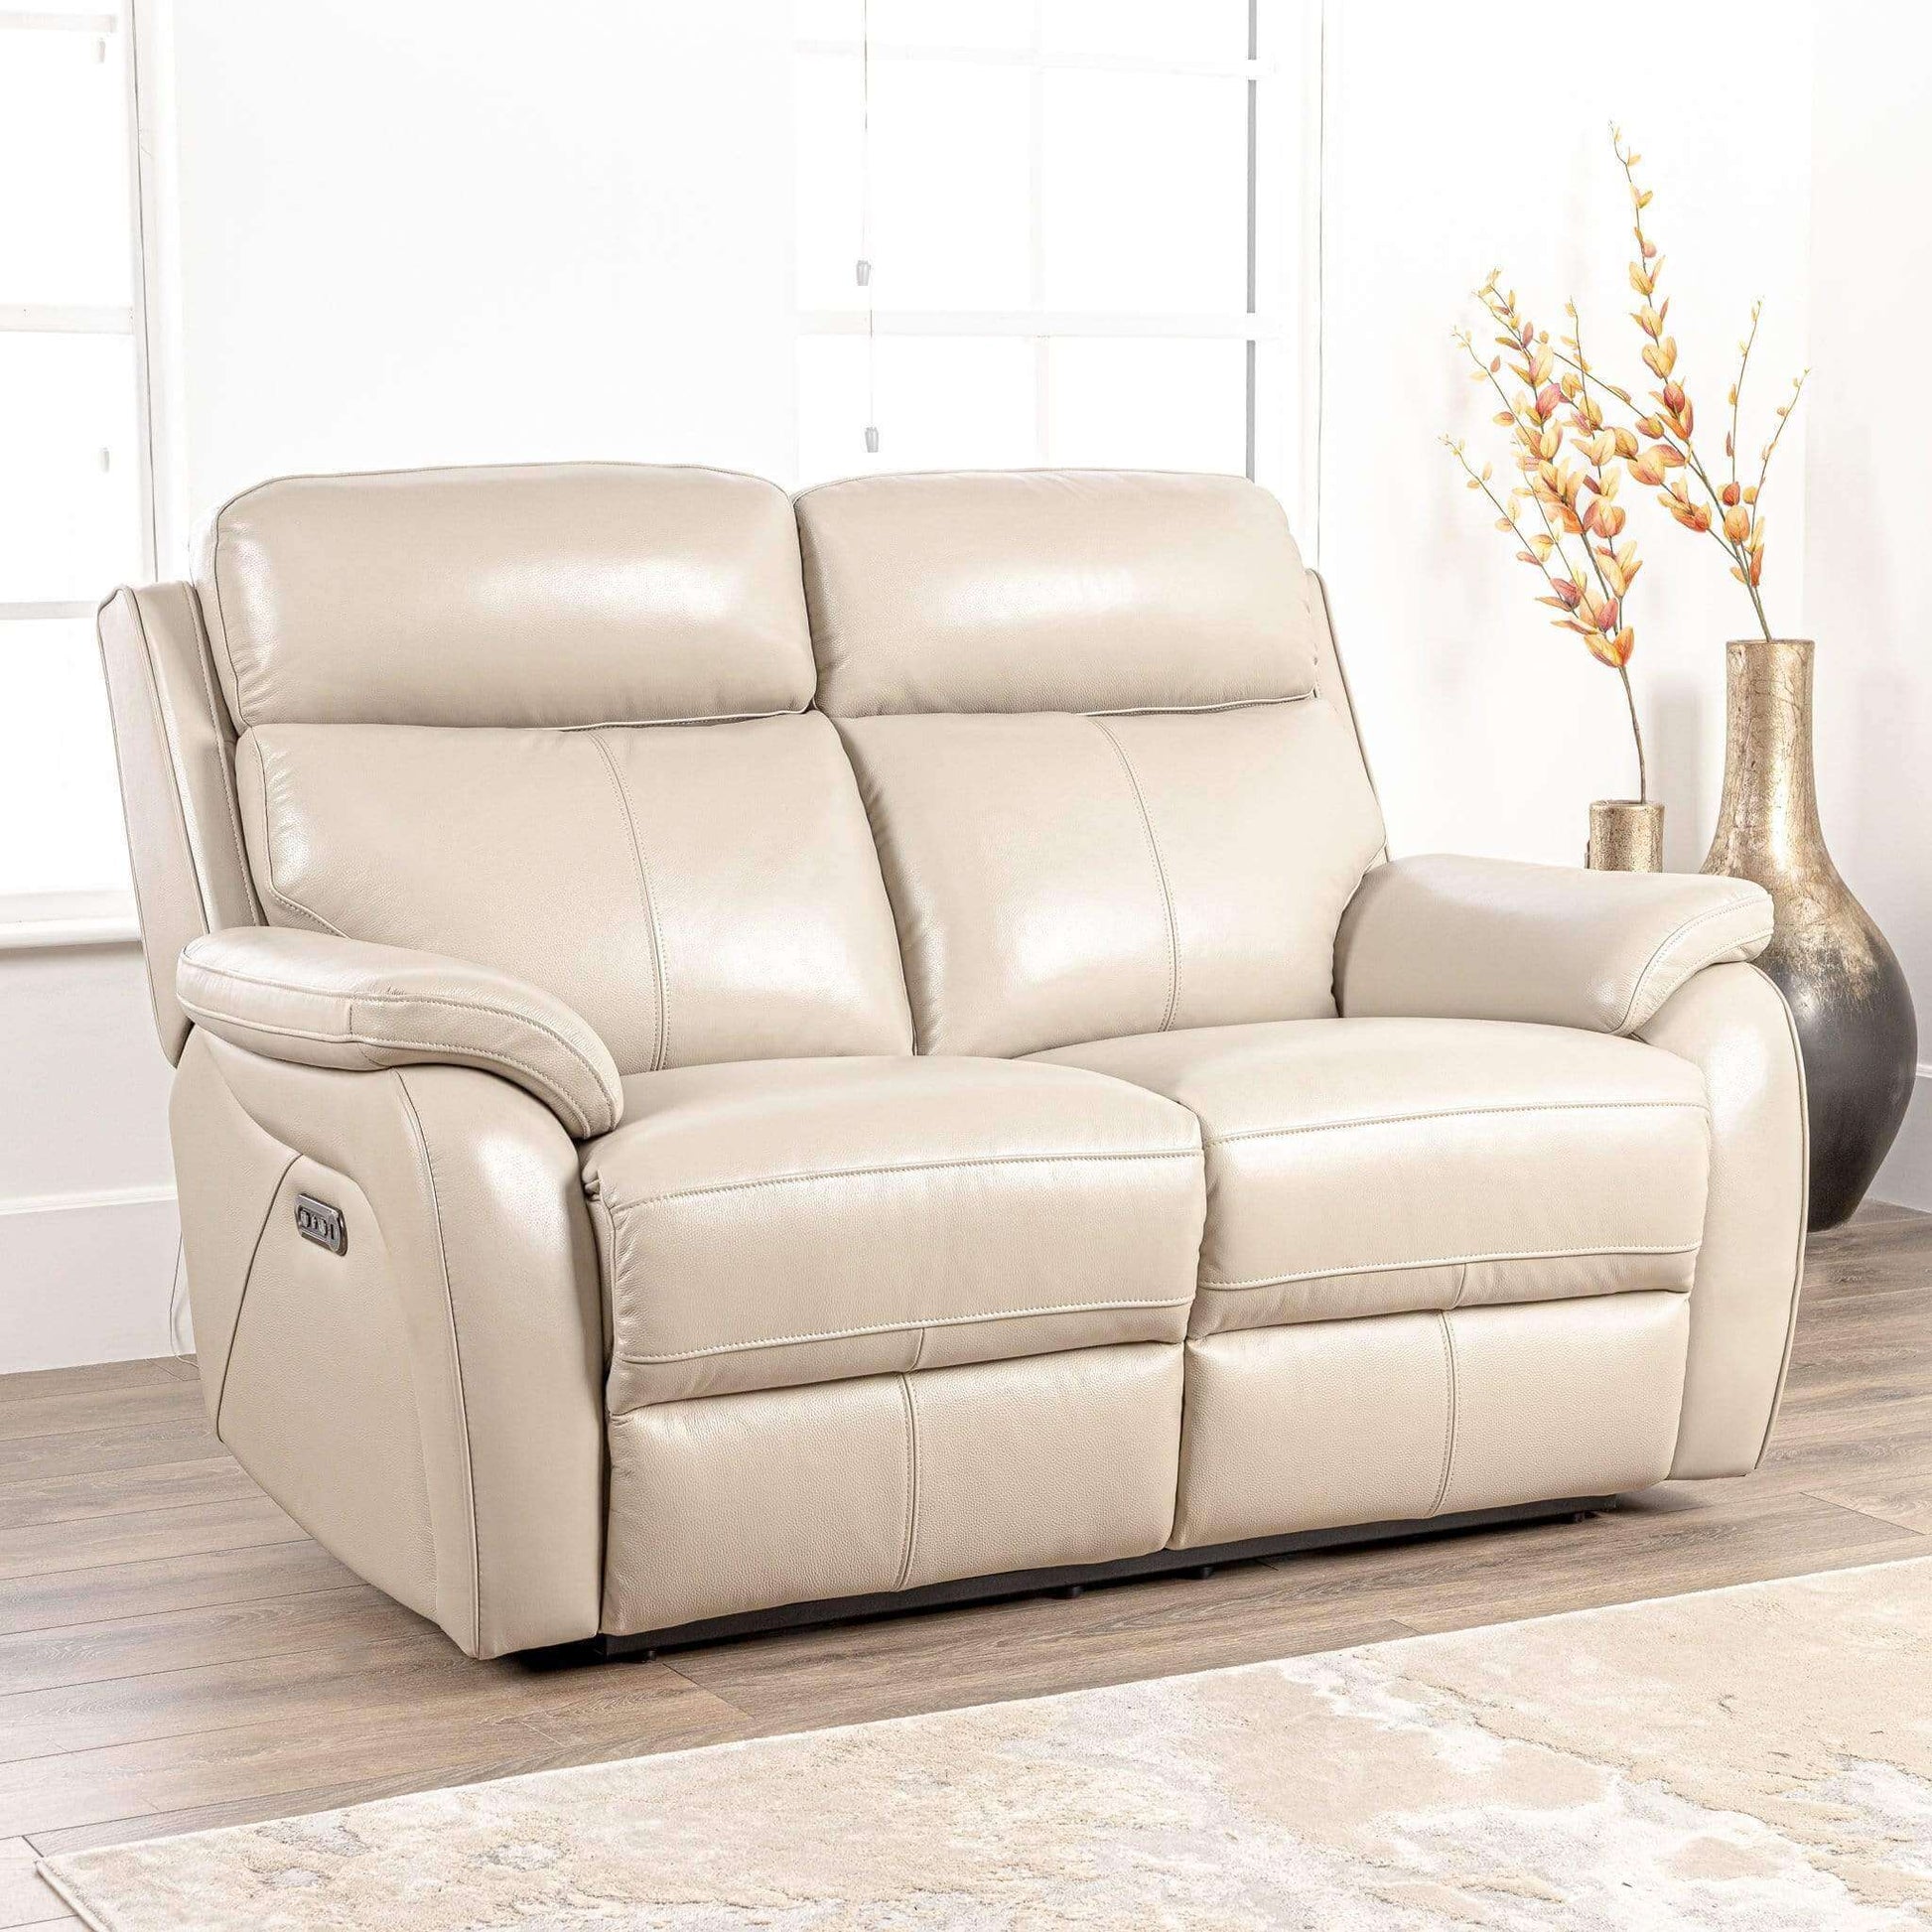 Furniture  -  Comfort King Quincy 2 Seat Electric Reclining Sofa  -  50153205